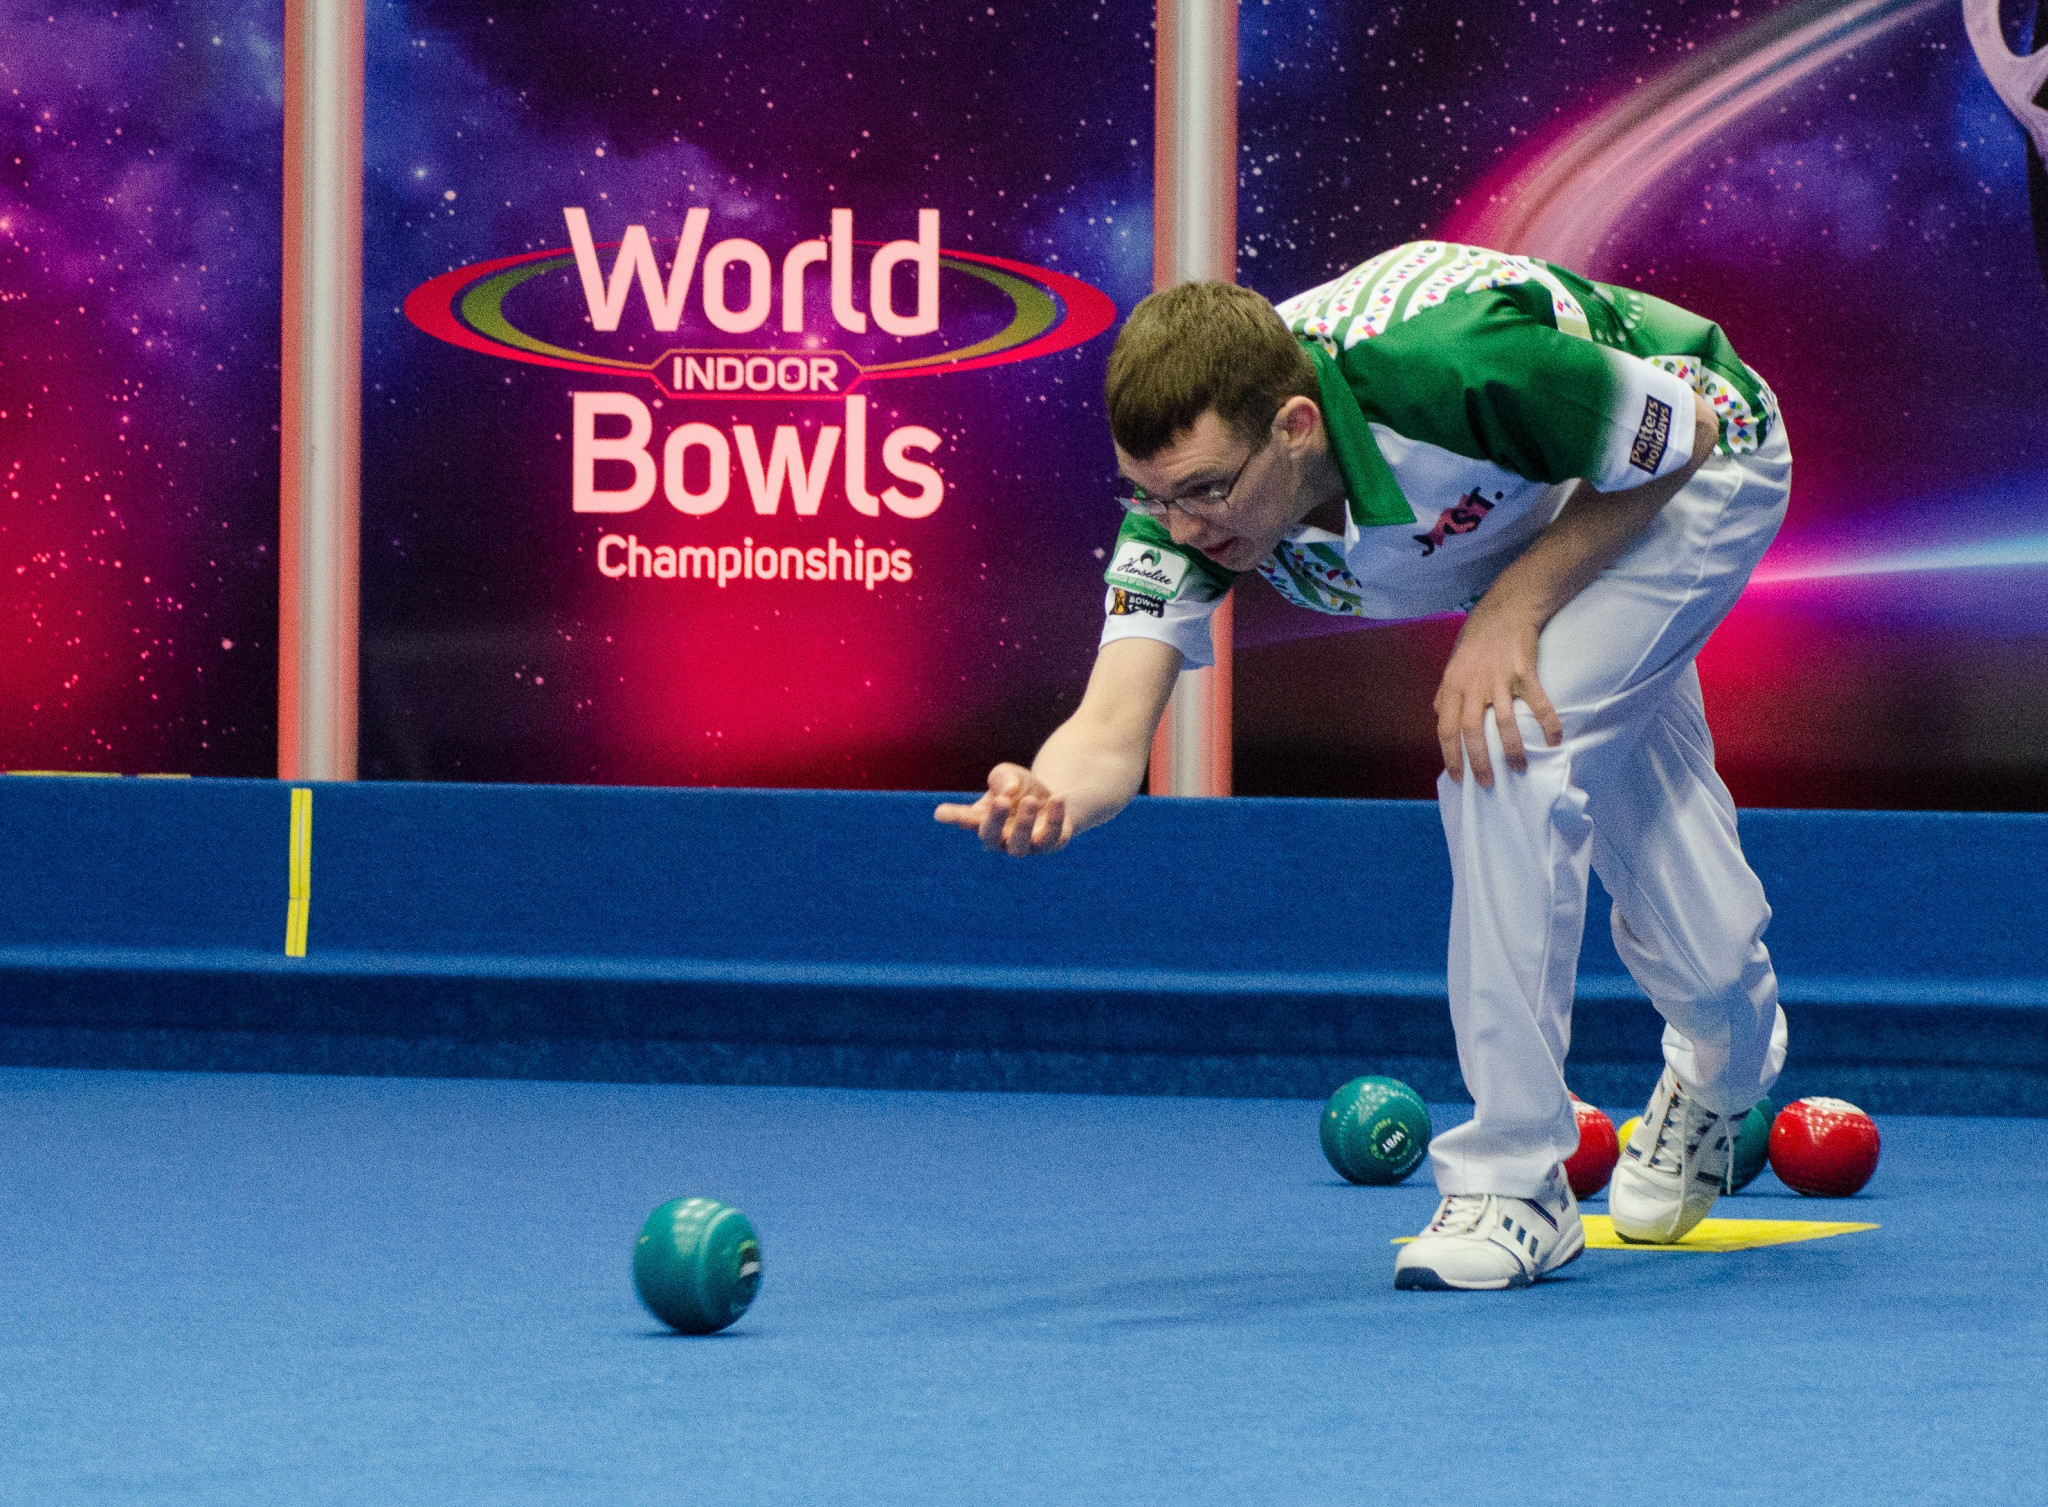 England's Mark Dawes beat Scotland's Darren Burnett in the first of the men's singles semi-finals at the World Indoor Bowls Championships in Great Yarmouth ©WorldBowlsTour